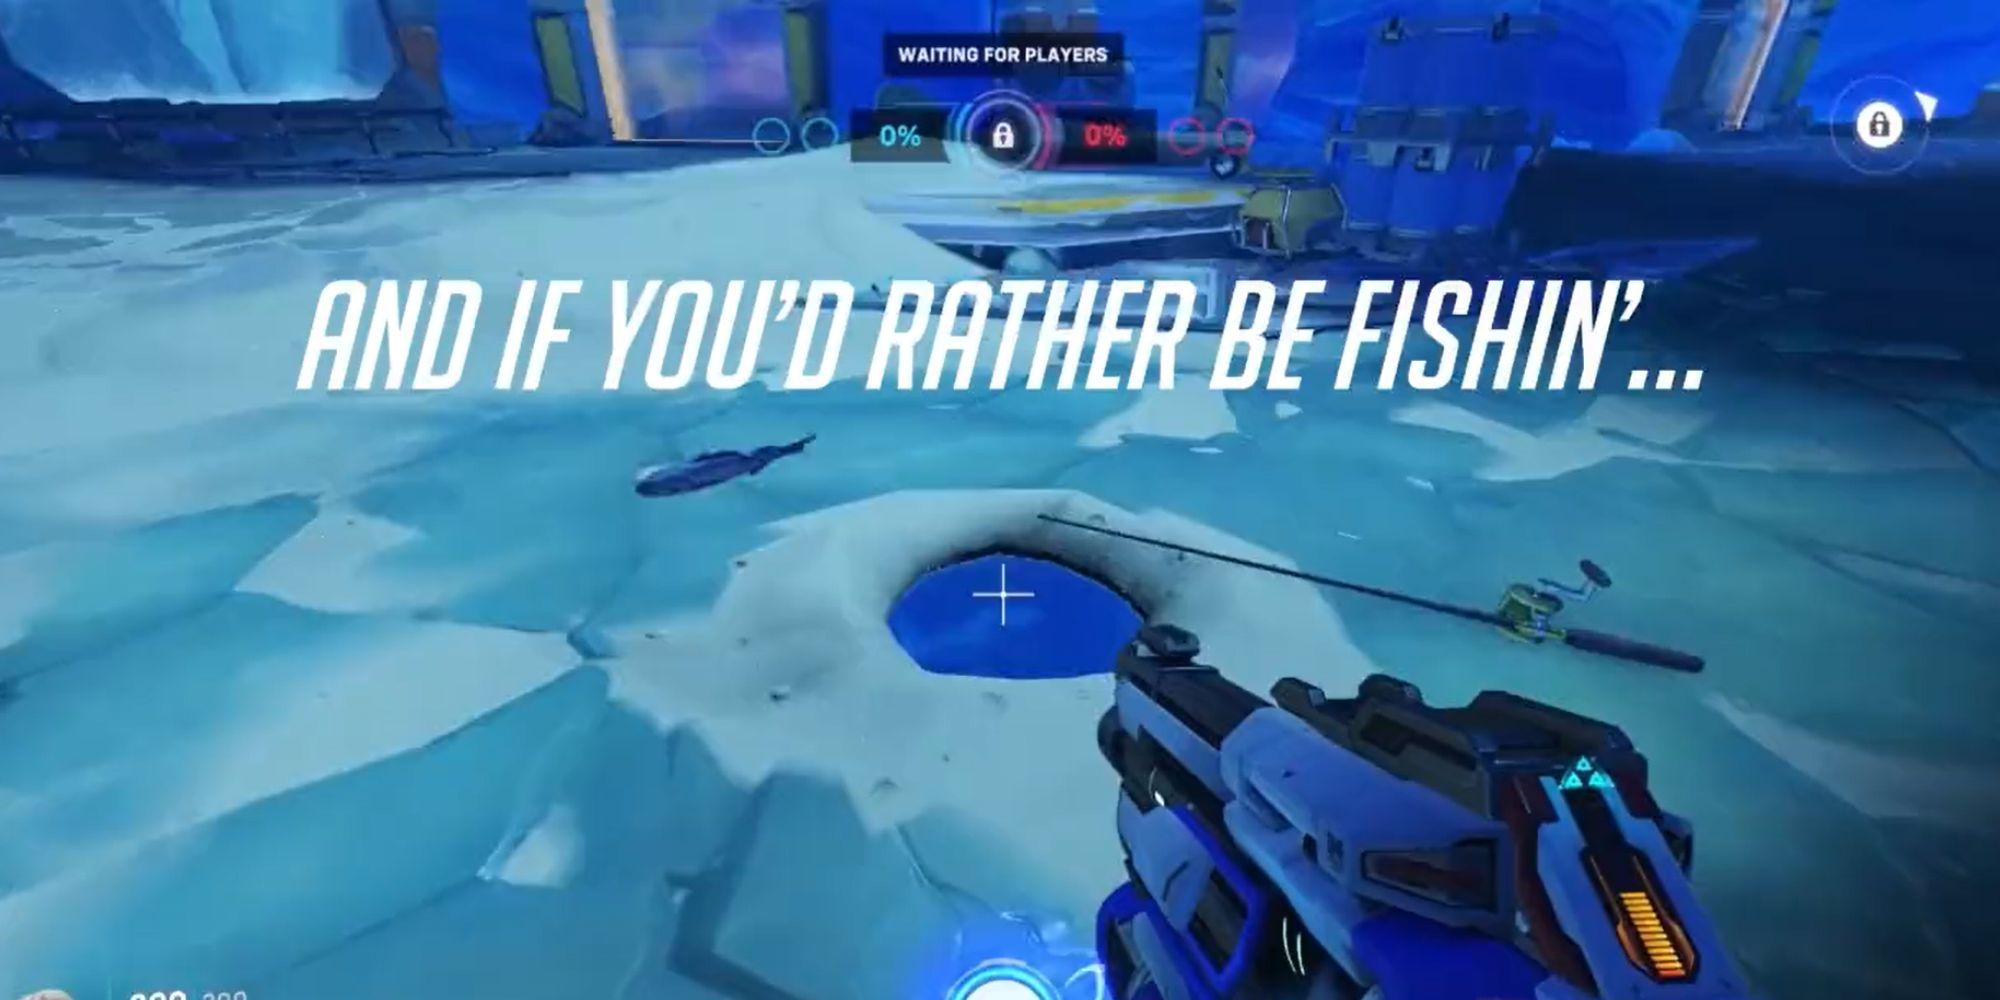 An Overwatch 2 player playing as Soldier 76 is standing over an ice fishing hole. The text reads 